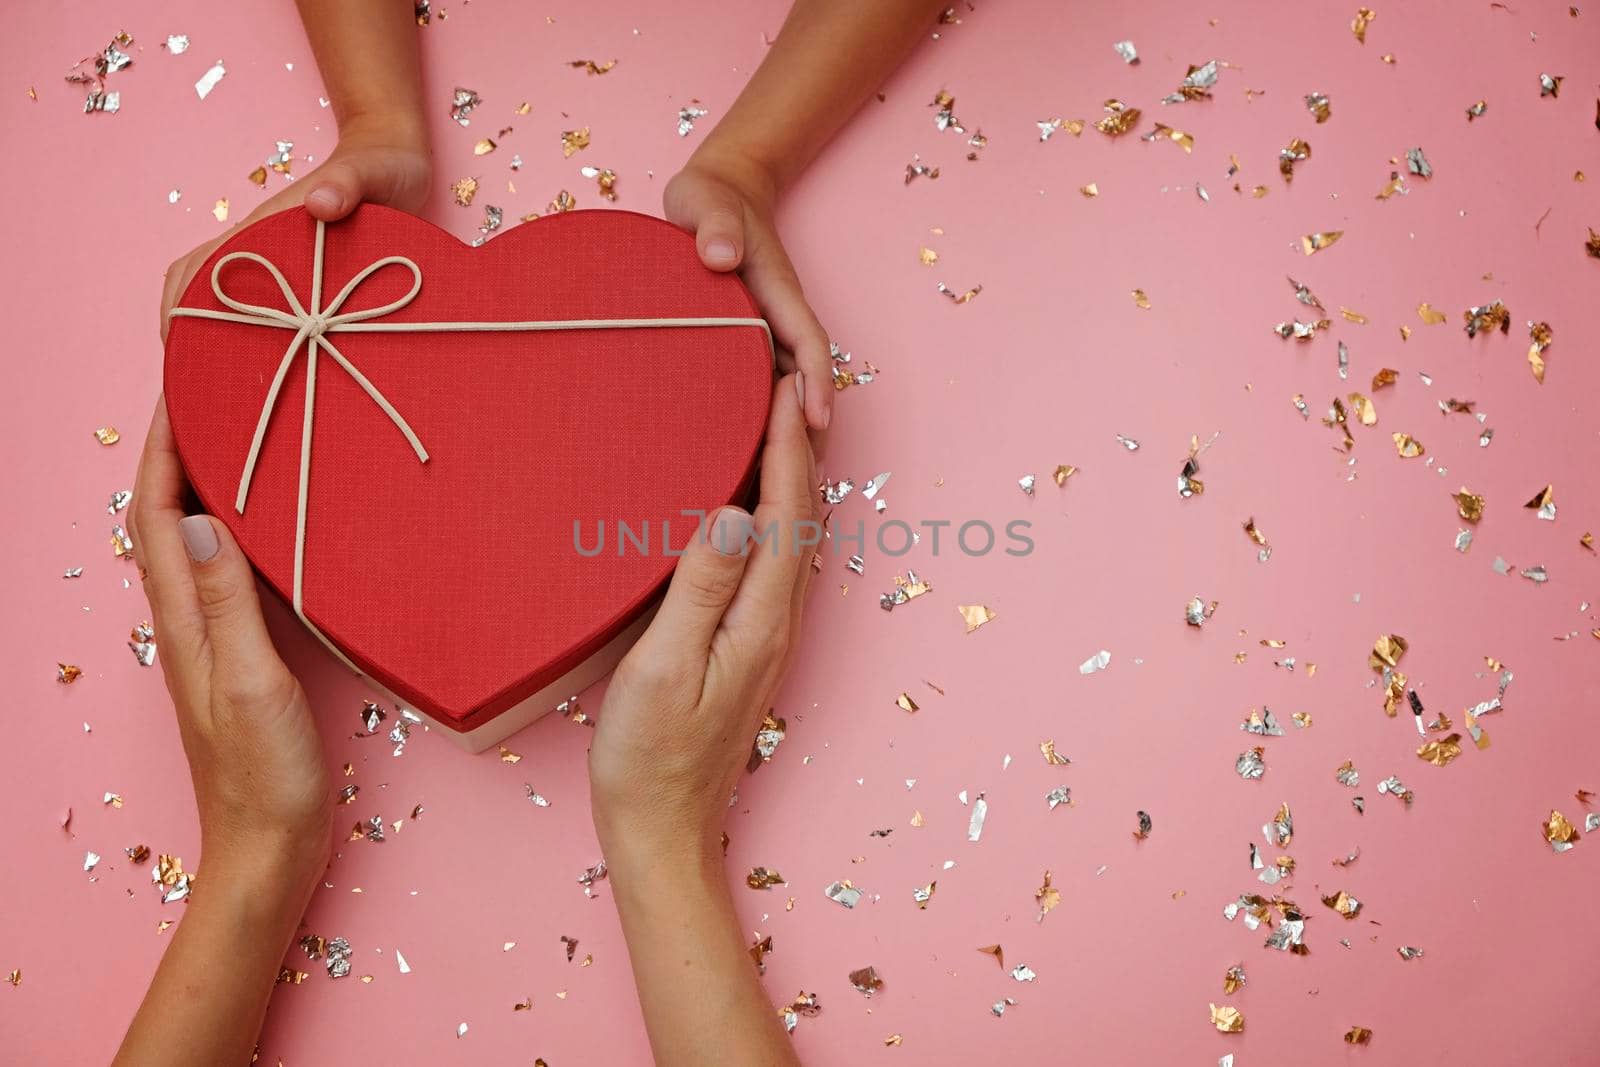 Red heart shape gift box on festive pink background, with child's and mom's hands. Mothers day mock up